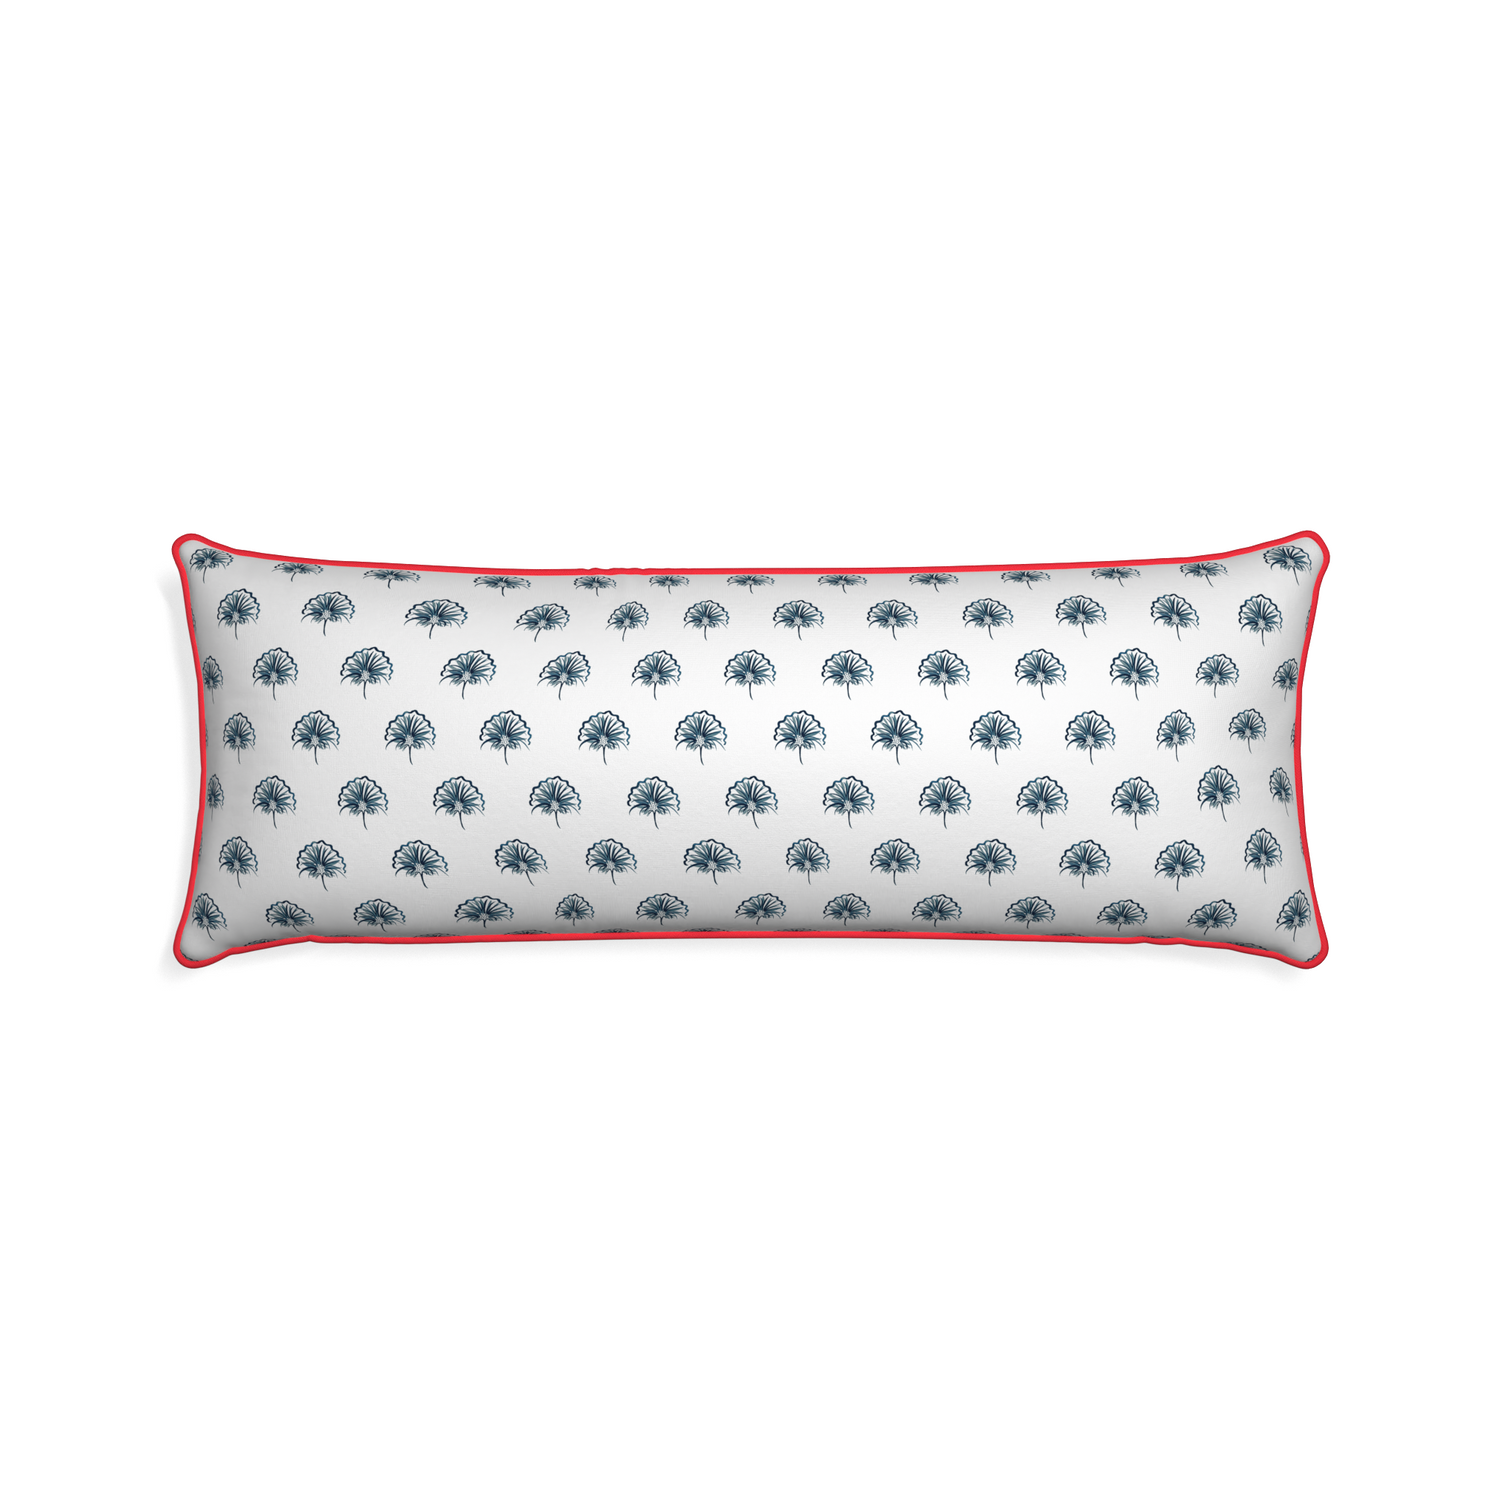 Xl-lumbar penelope midnight custom pillow with cherry piping on white background